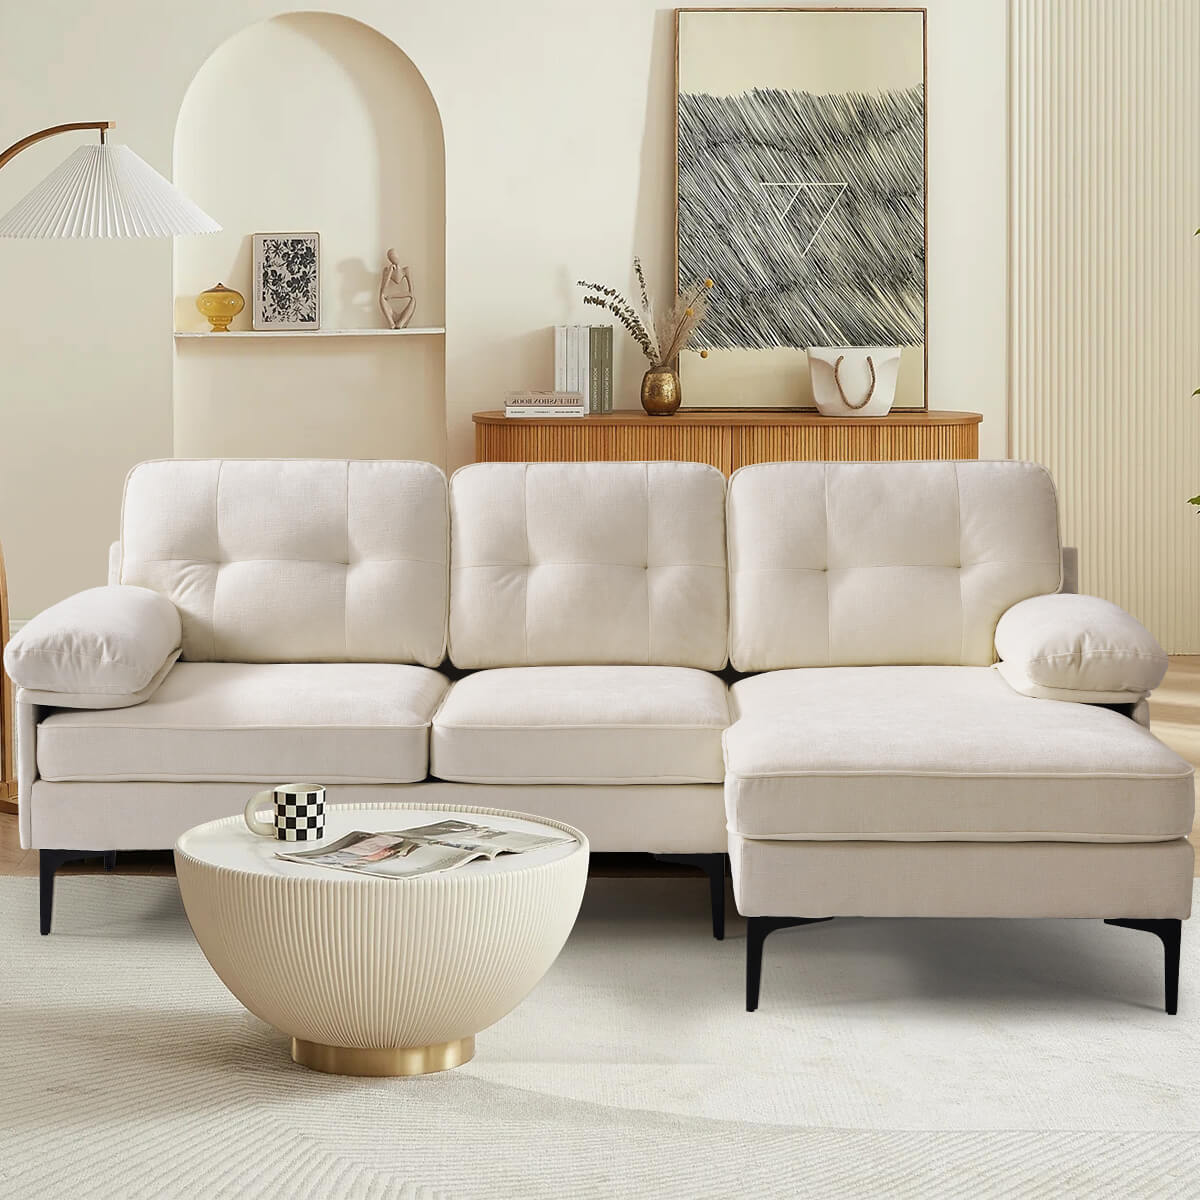 Convertible Sectional Sofa 83" L Shaped Couch with Reversible Chaise, Chenille Fabric